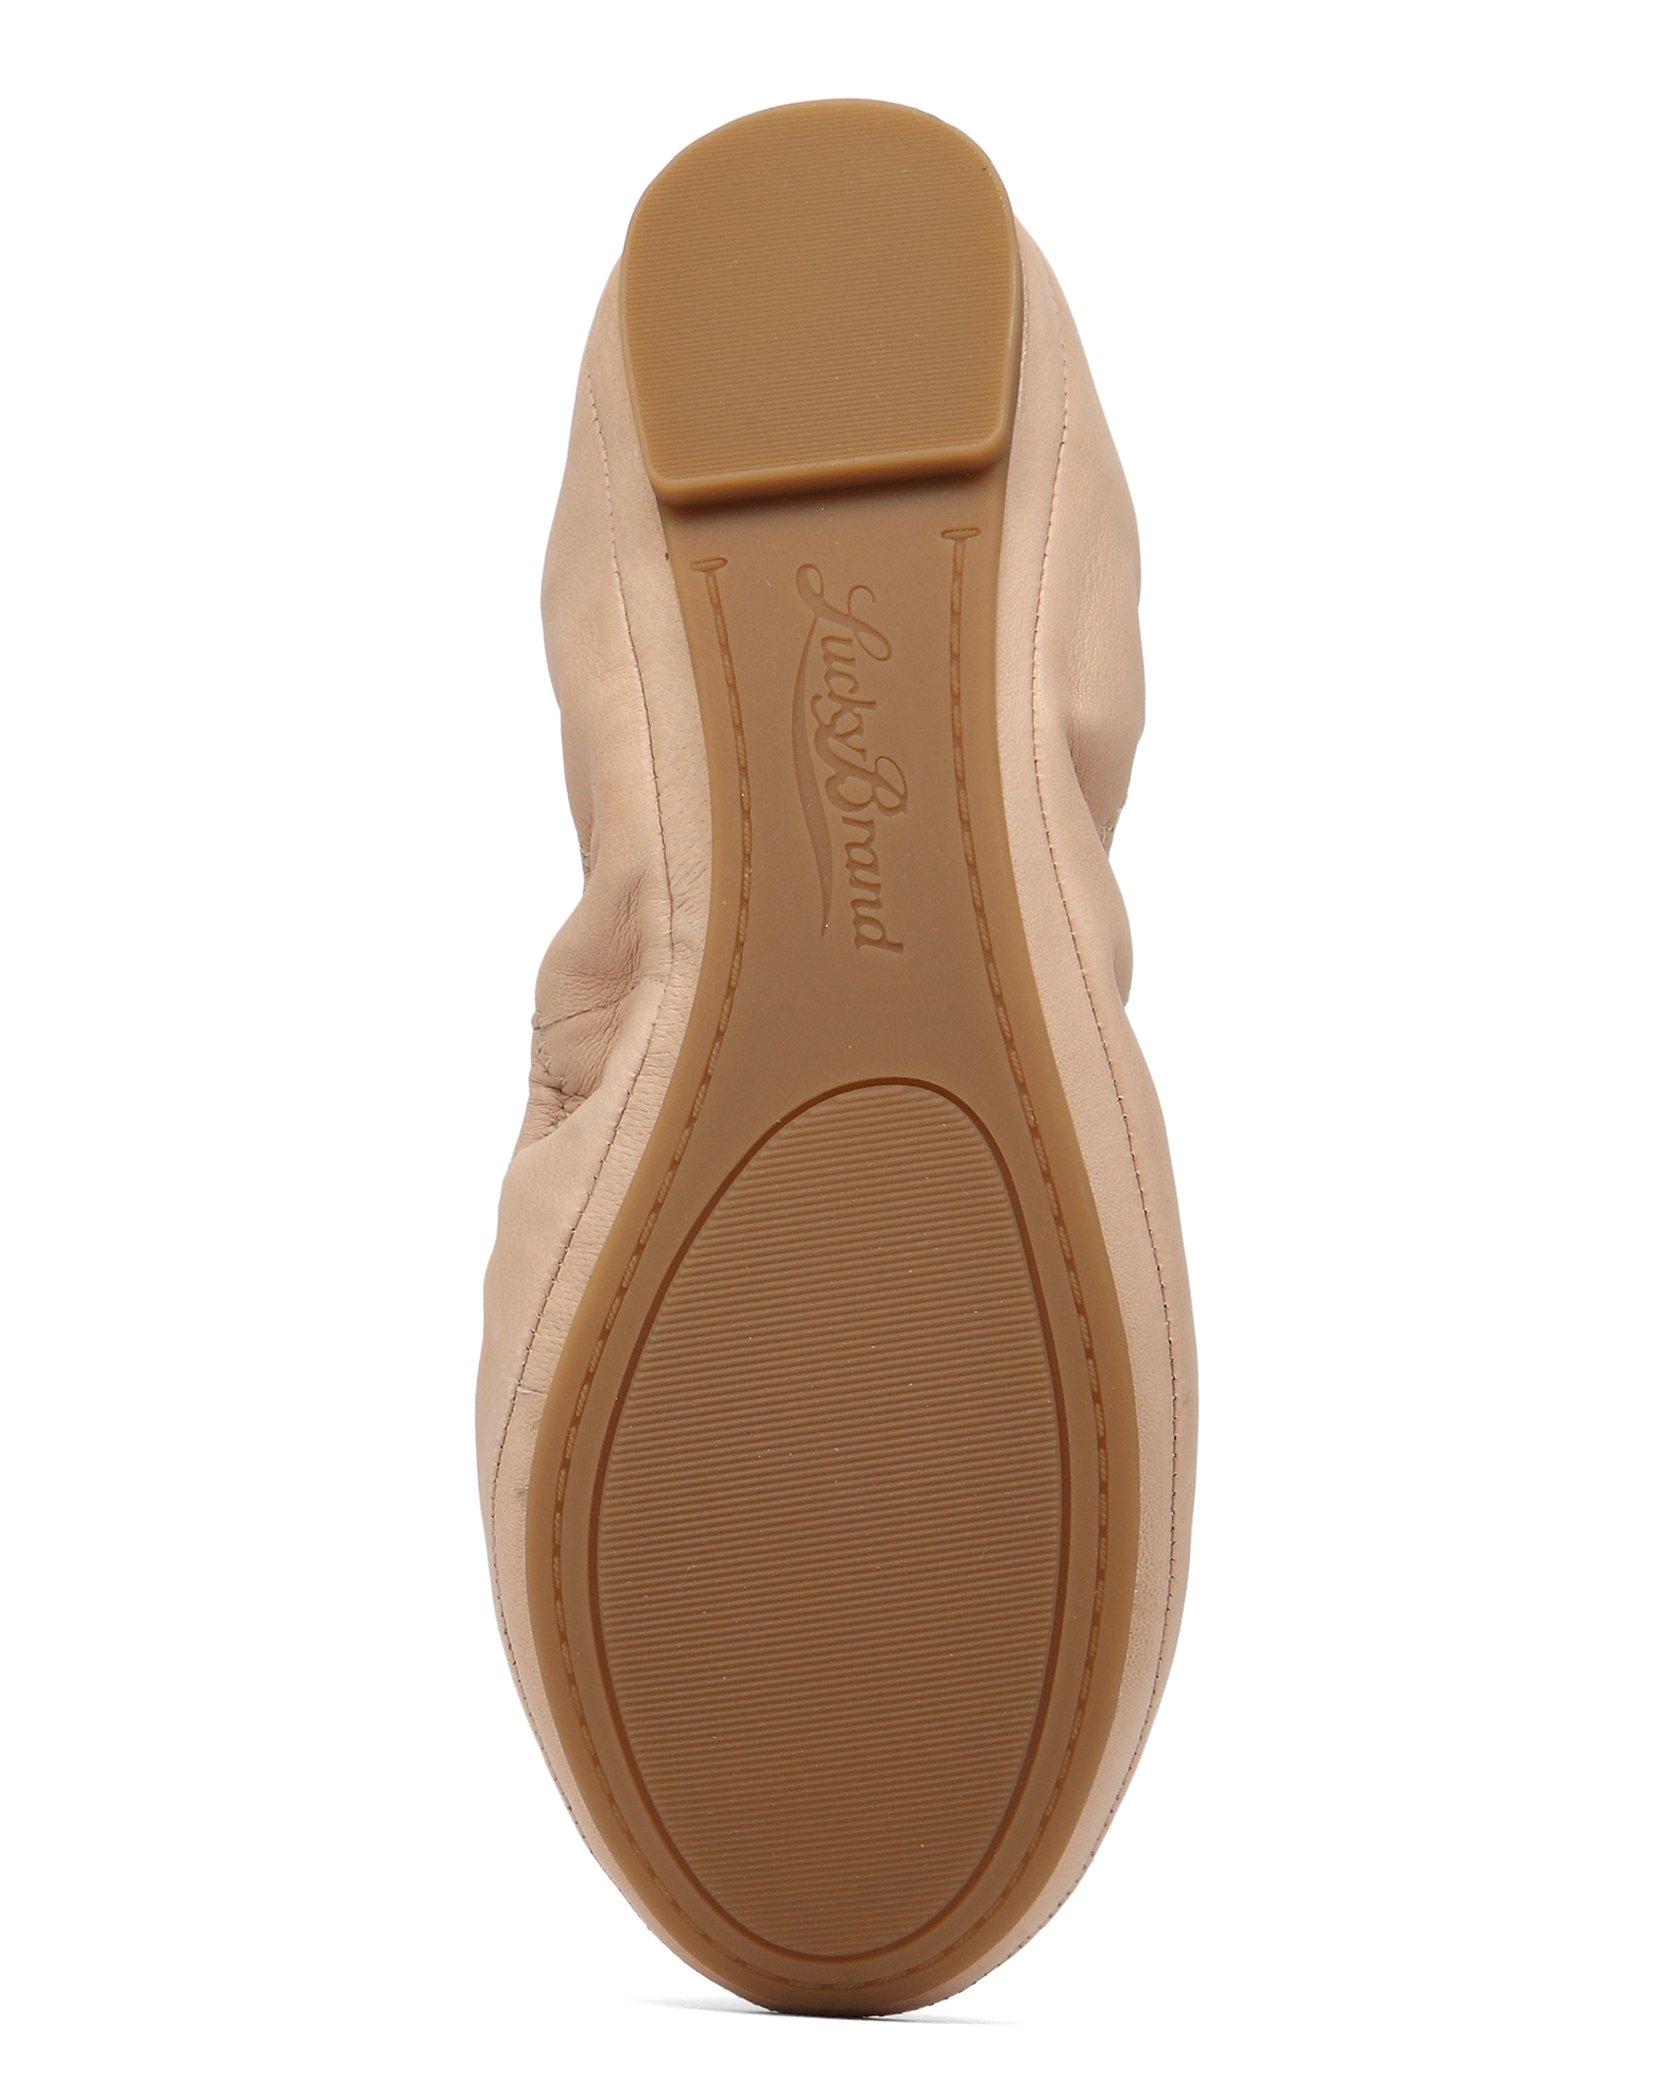 EMMIE LEATHER FLATS, image 5